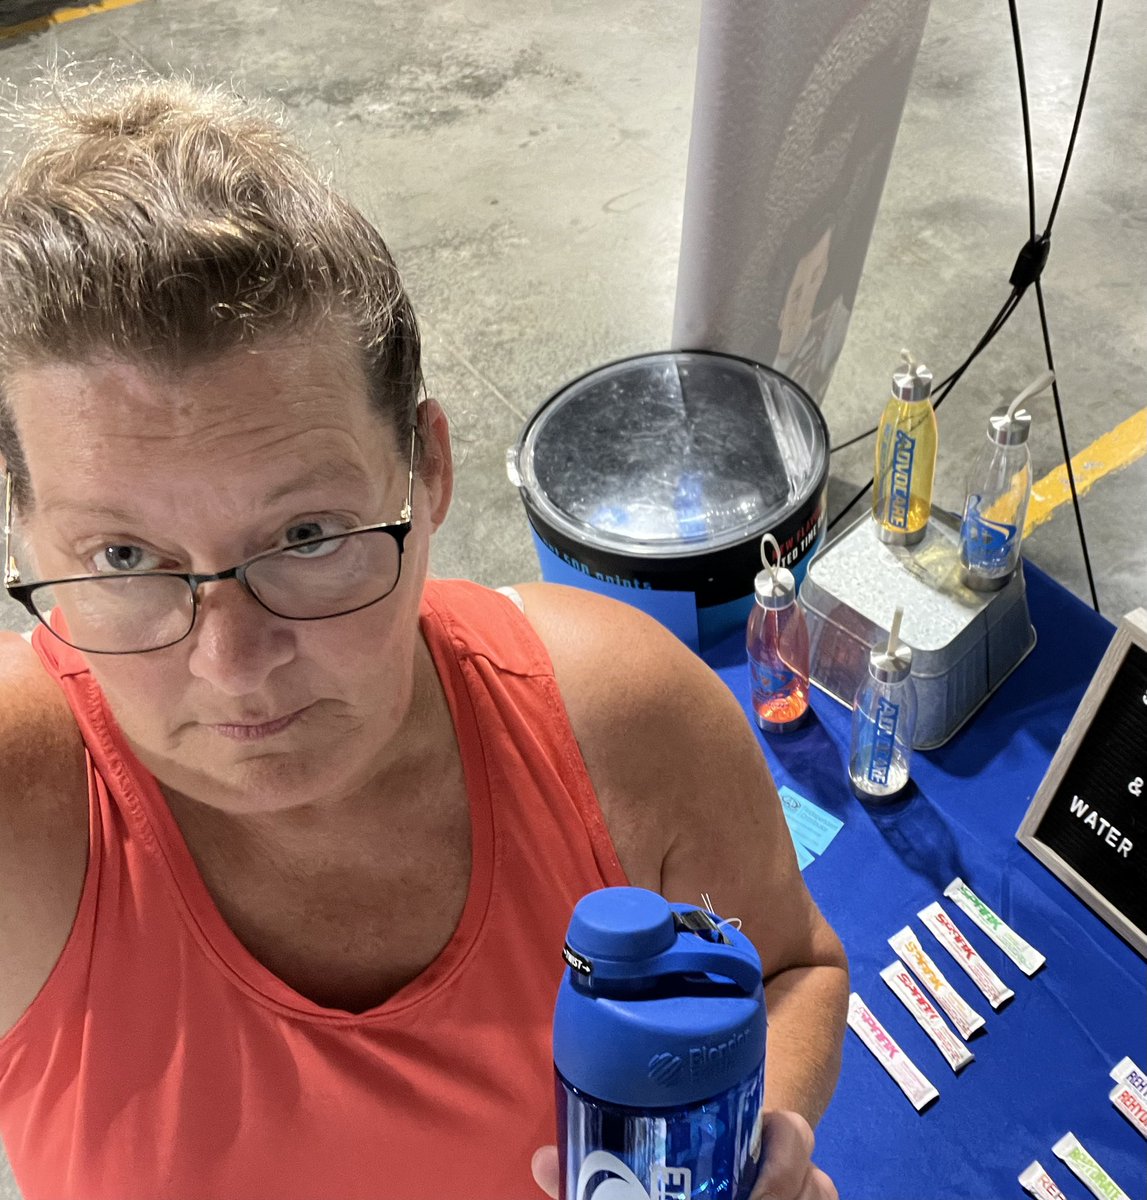 I take my #advocarerehydrate with me when I am working my #advocare booth at the fair. 

My.Advocare.com/2500007769

#advocaresummerremix #advocarelife #advocaredistributor